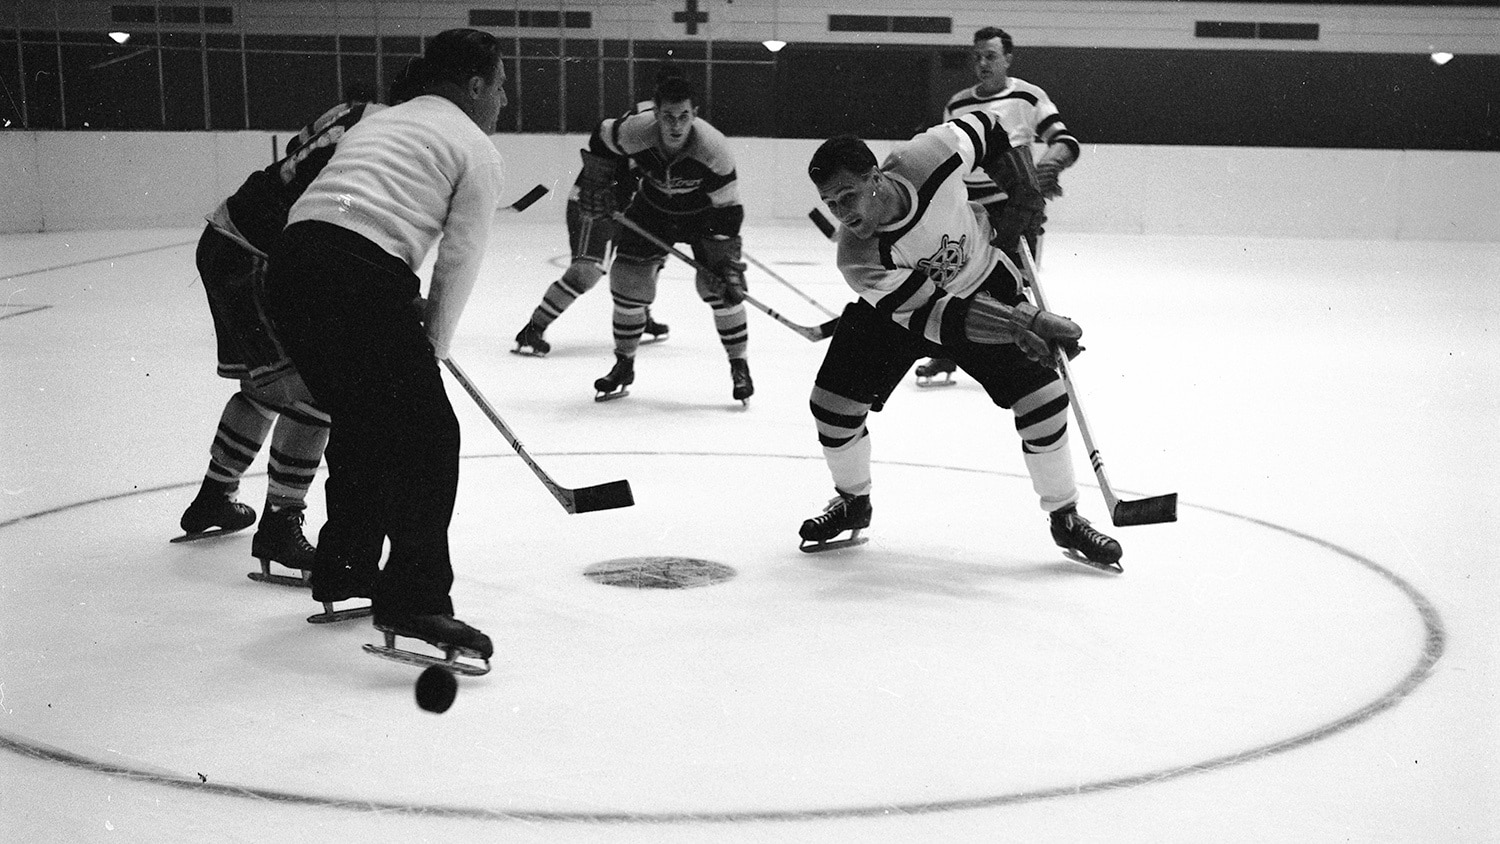 An archival photo of N.C. hockey players.